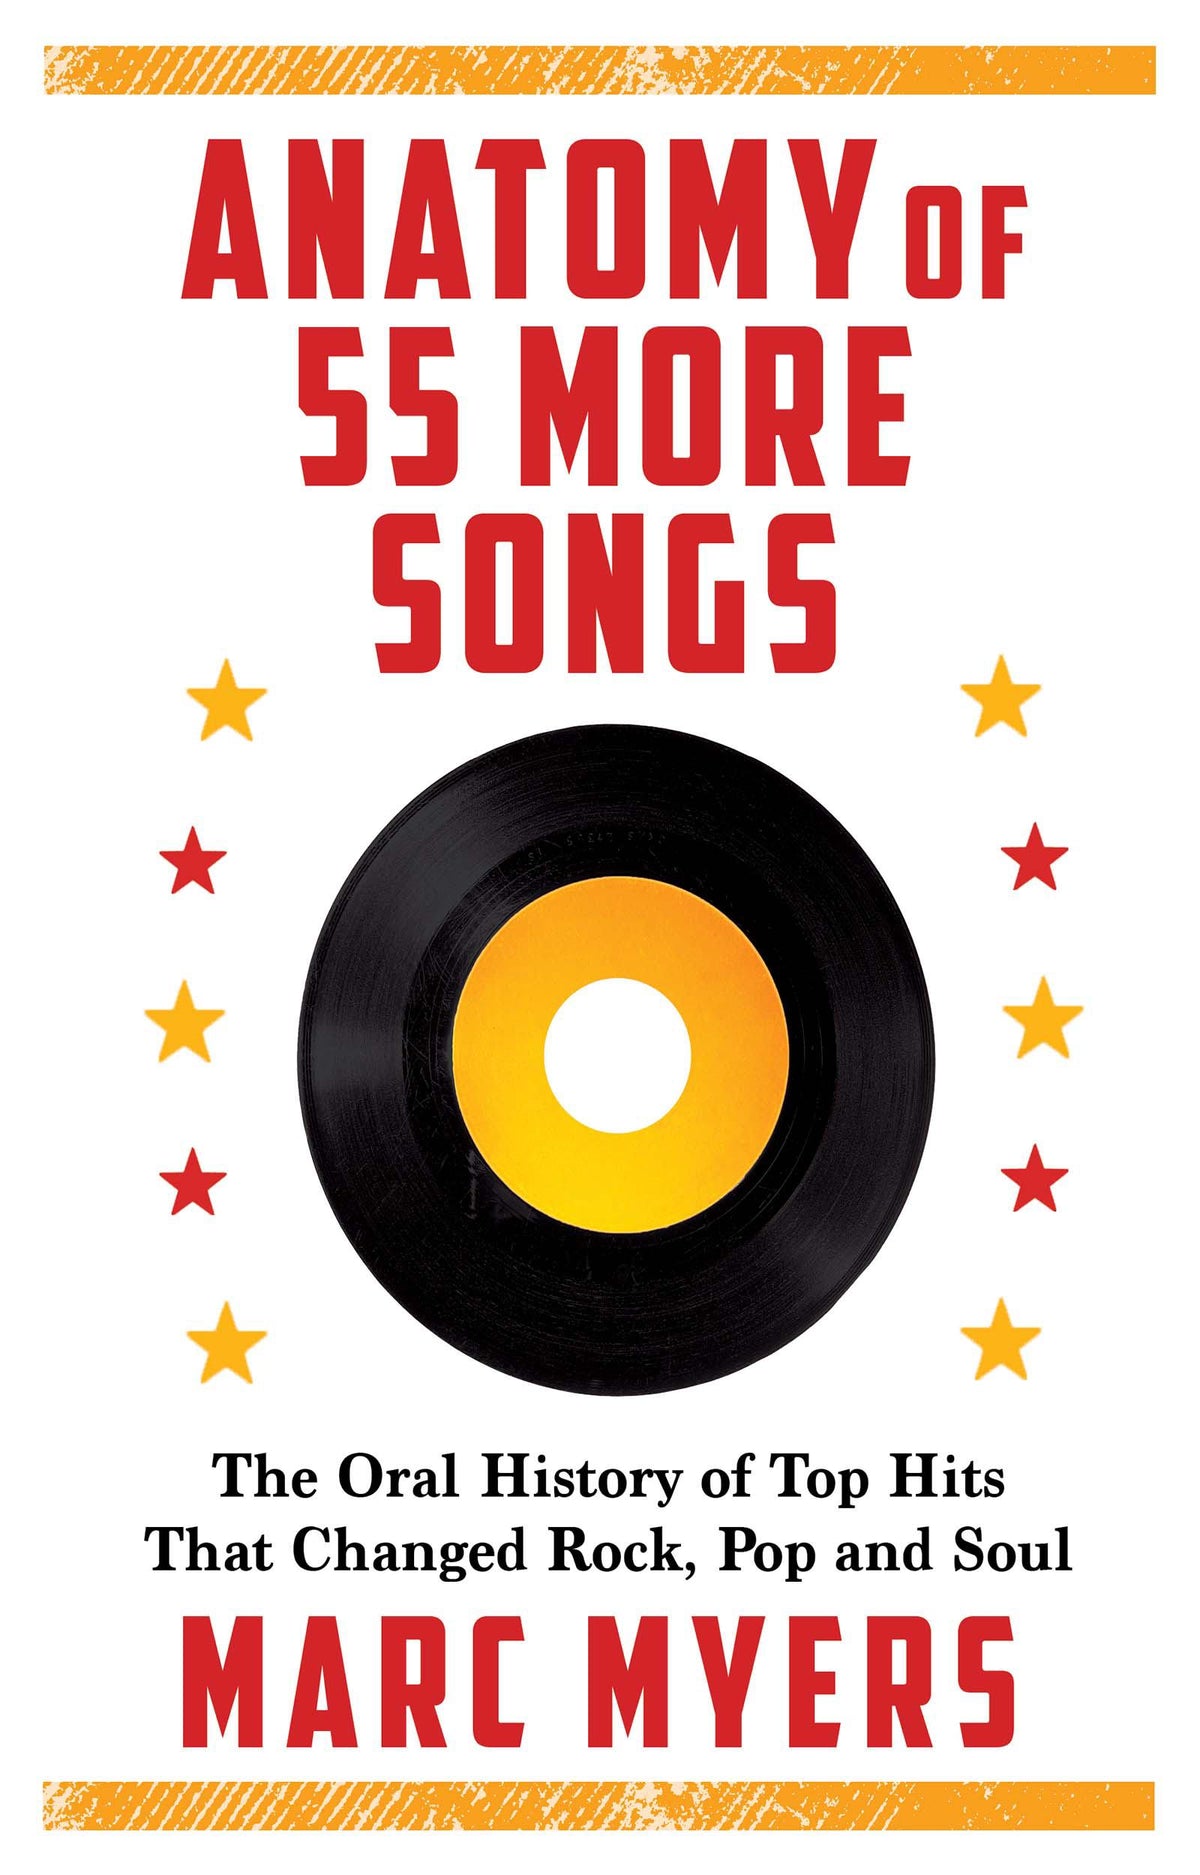 Anatomy of 55 More Songs: The Oral History of Top Hits That Changed Rock, Pop and Soul - Hardcover